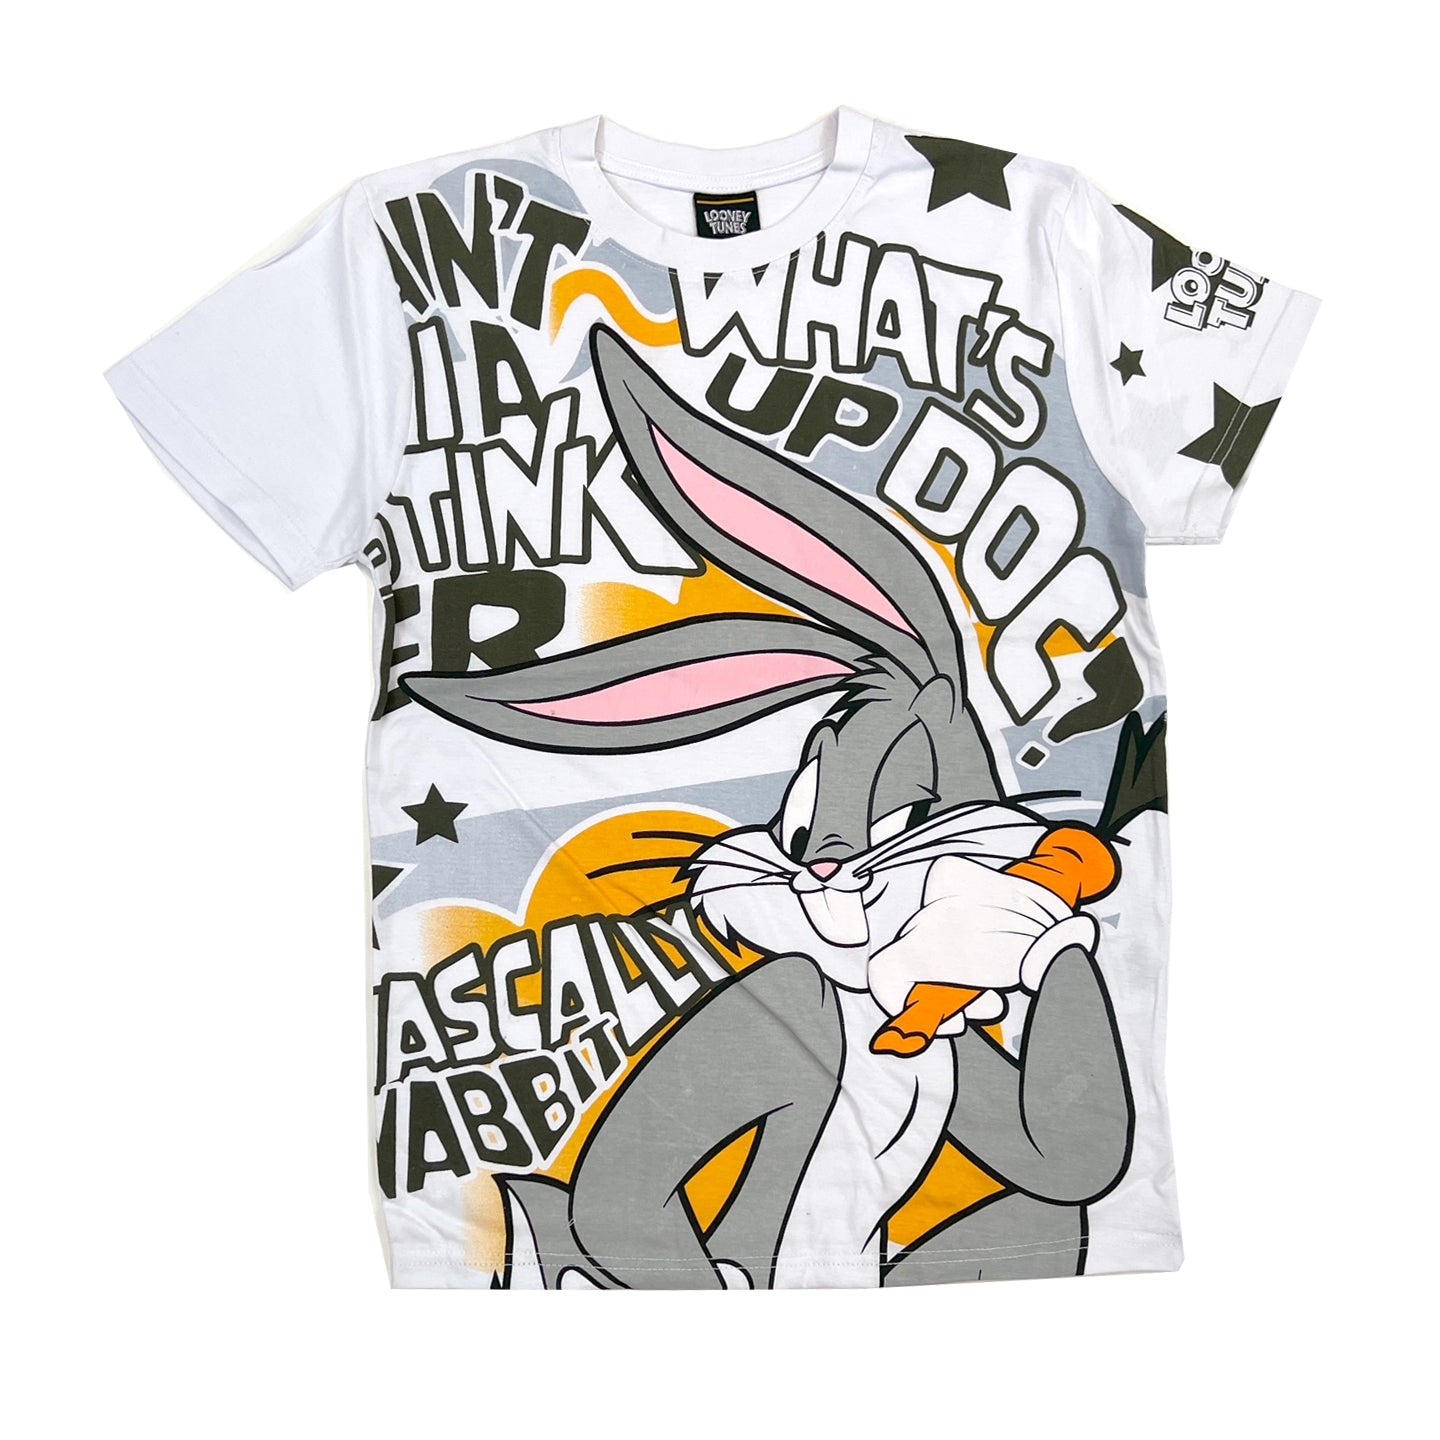 Looney Tunes Bugs Bunny for (White) / 2 Tee $16.99 $30